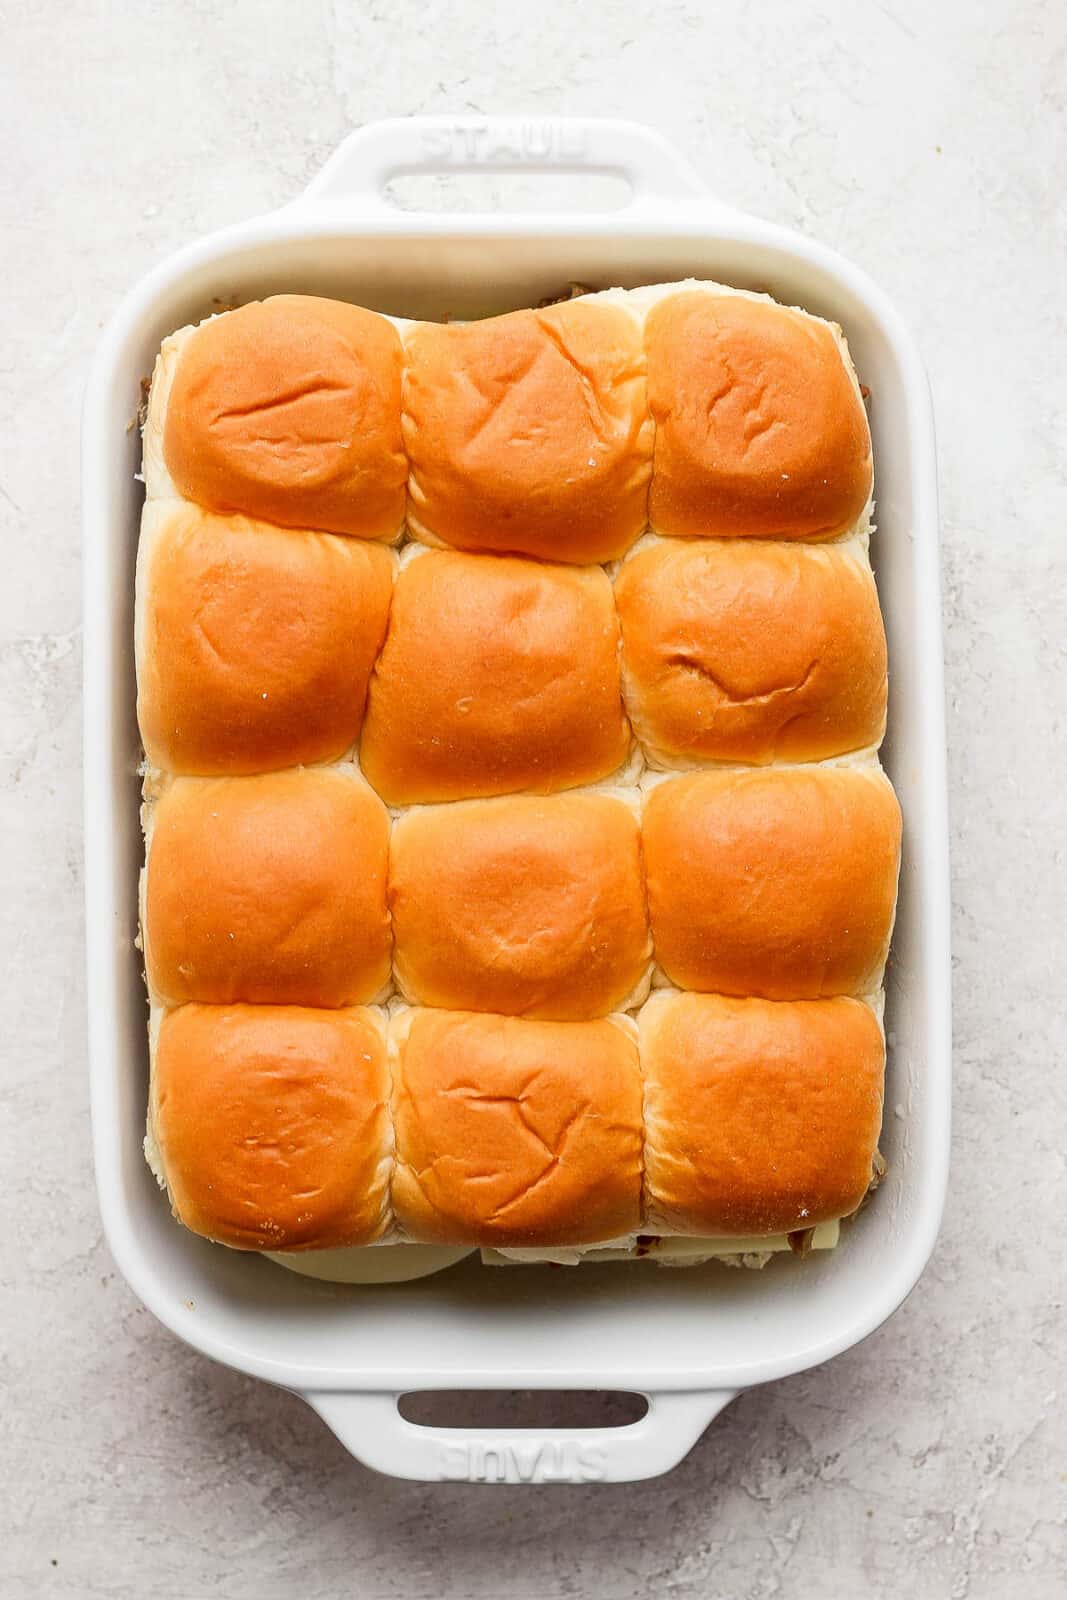 The top dinner rolls added to the top.